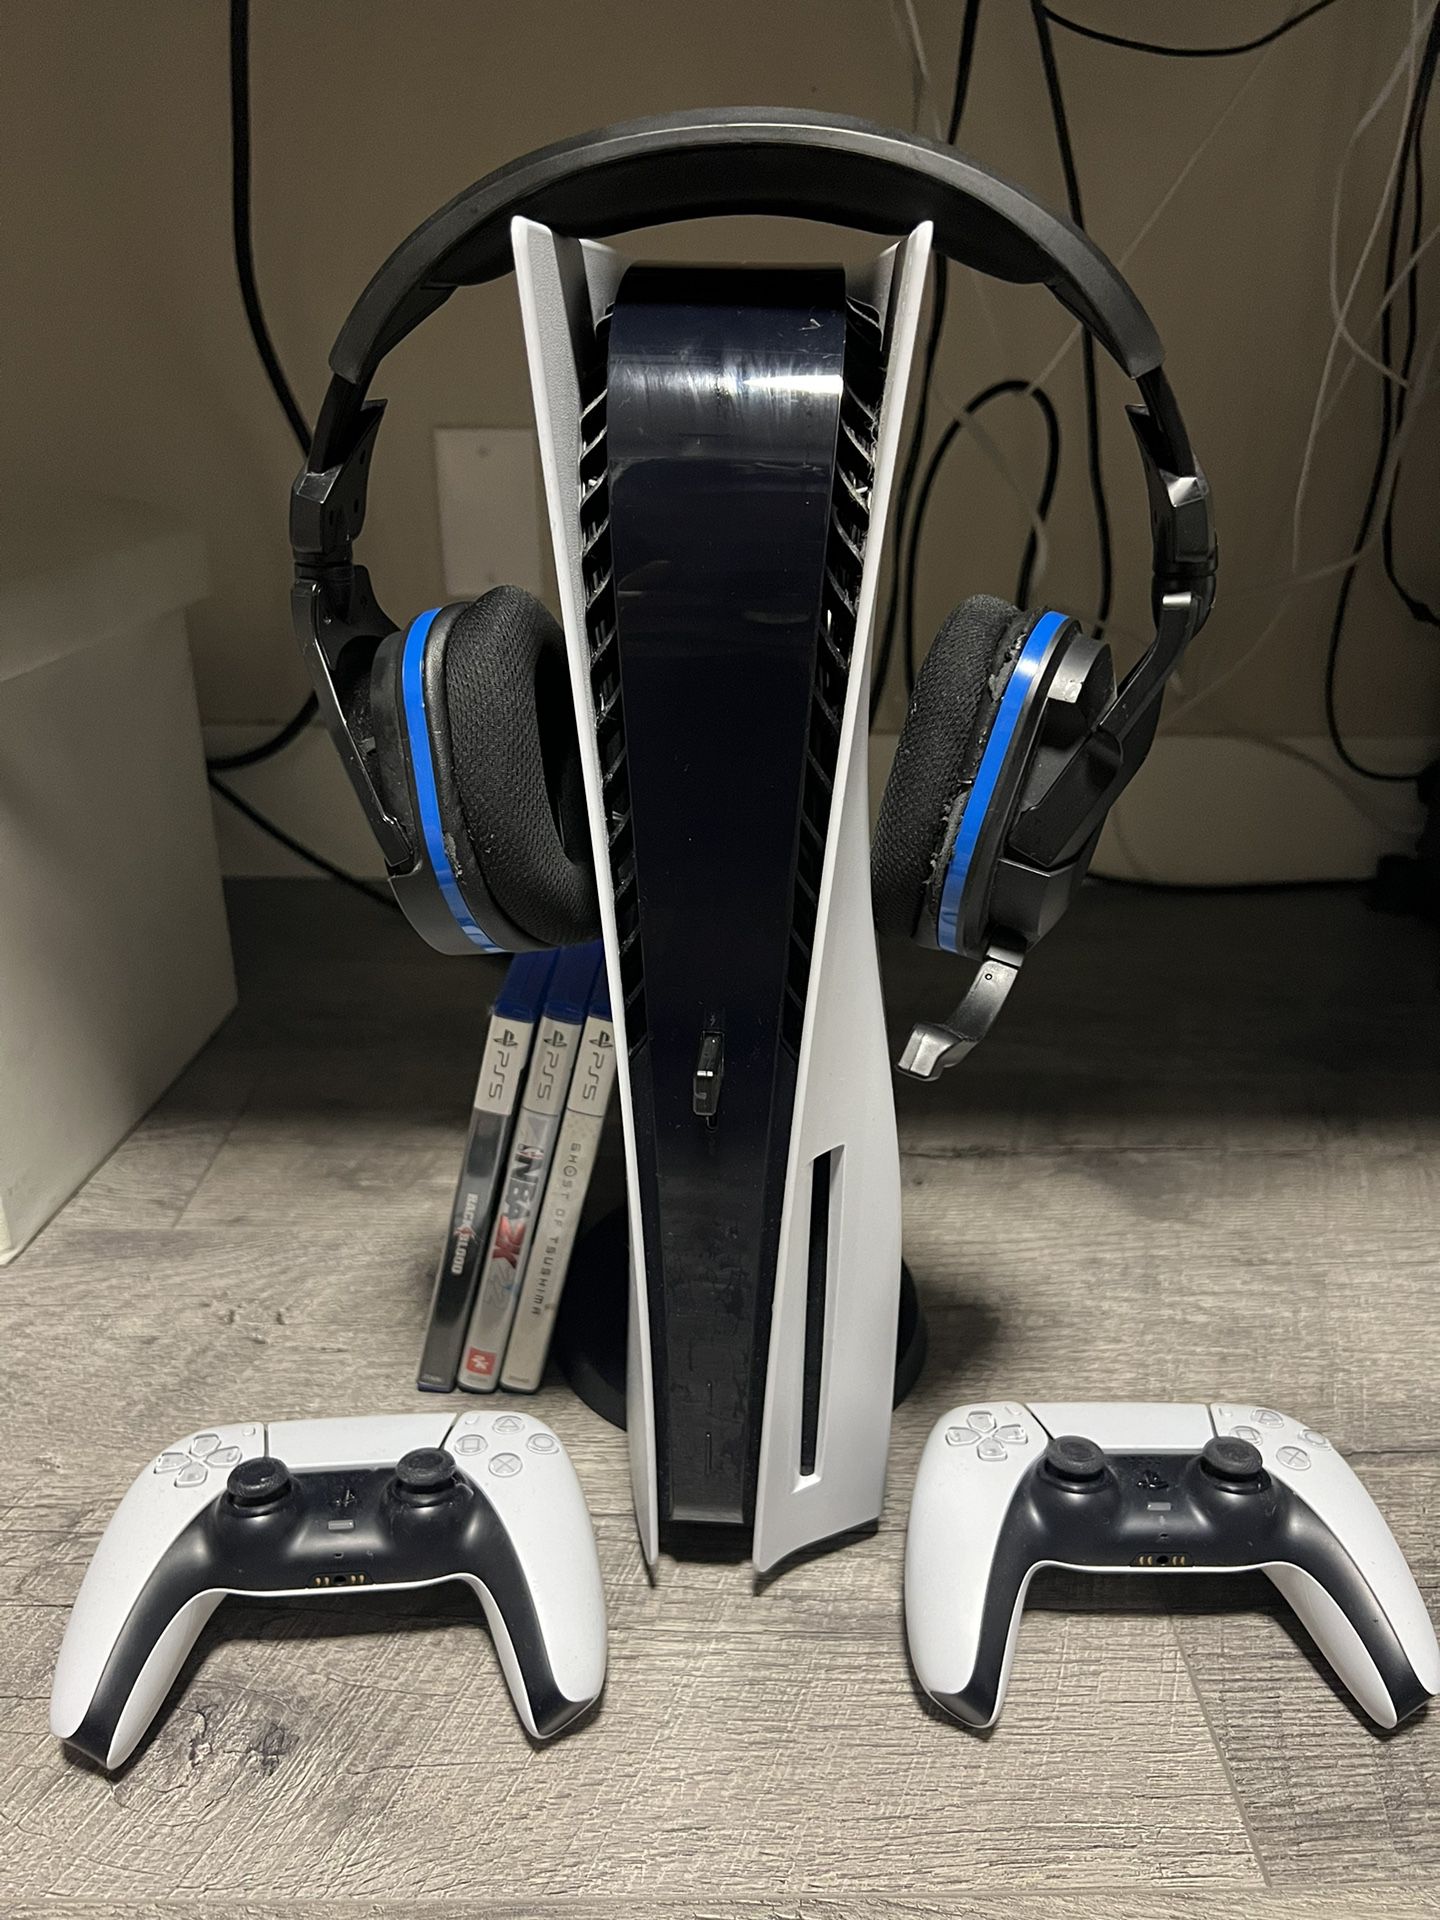 Ps5 Disk Version 2 Controllers With Turtle Beach Head Set